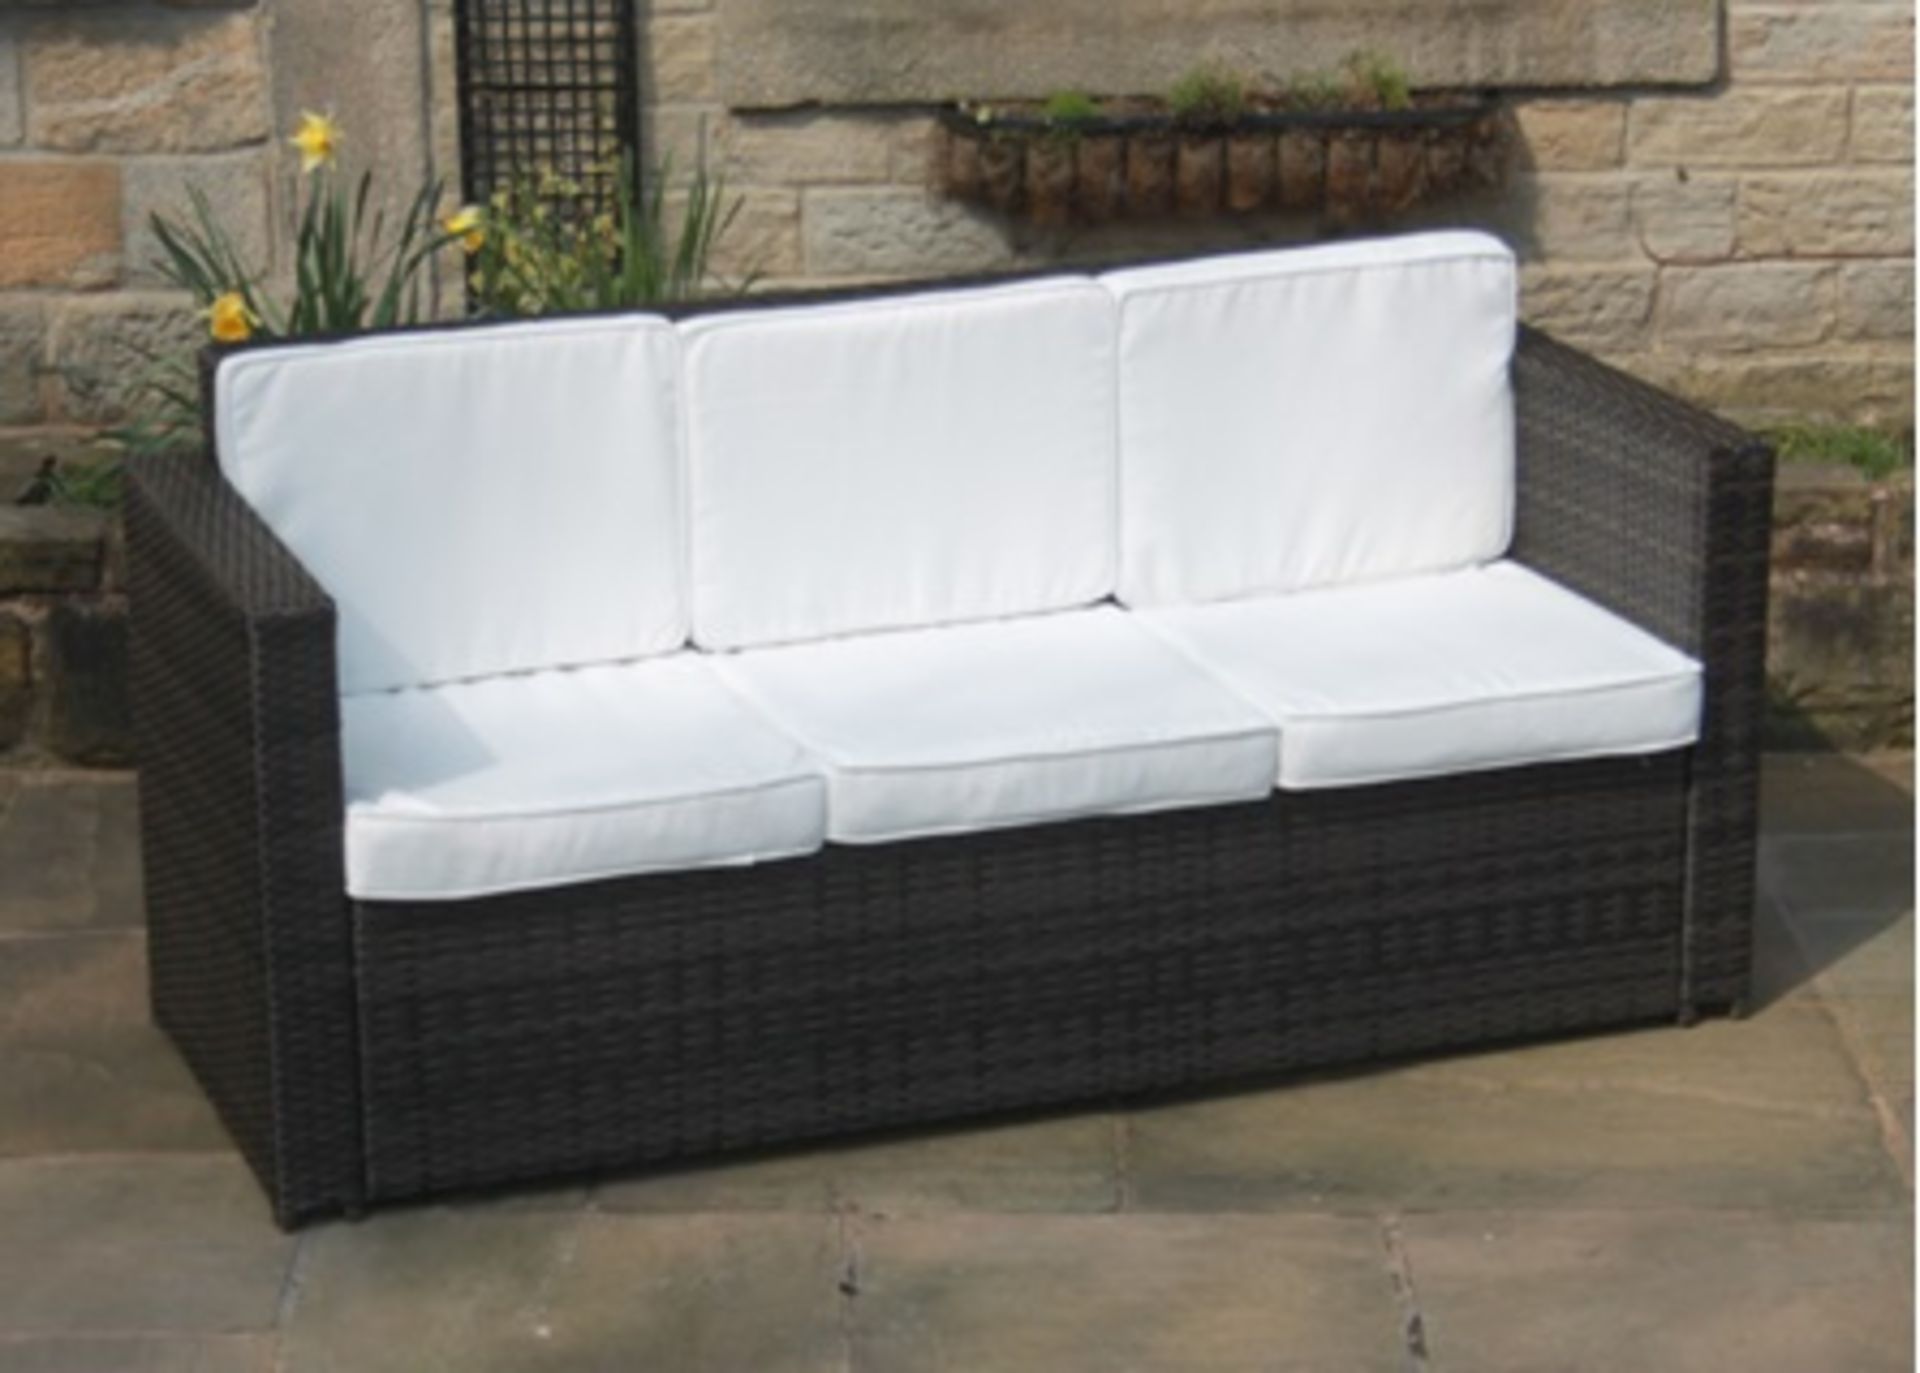 1 x Rattan Weather Proof Sofa 3 Seater Brown - STLRBRN (Brand New & Boxed)